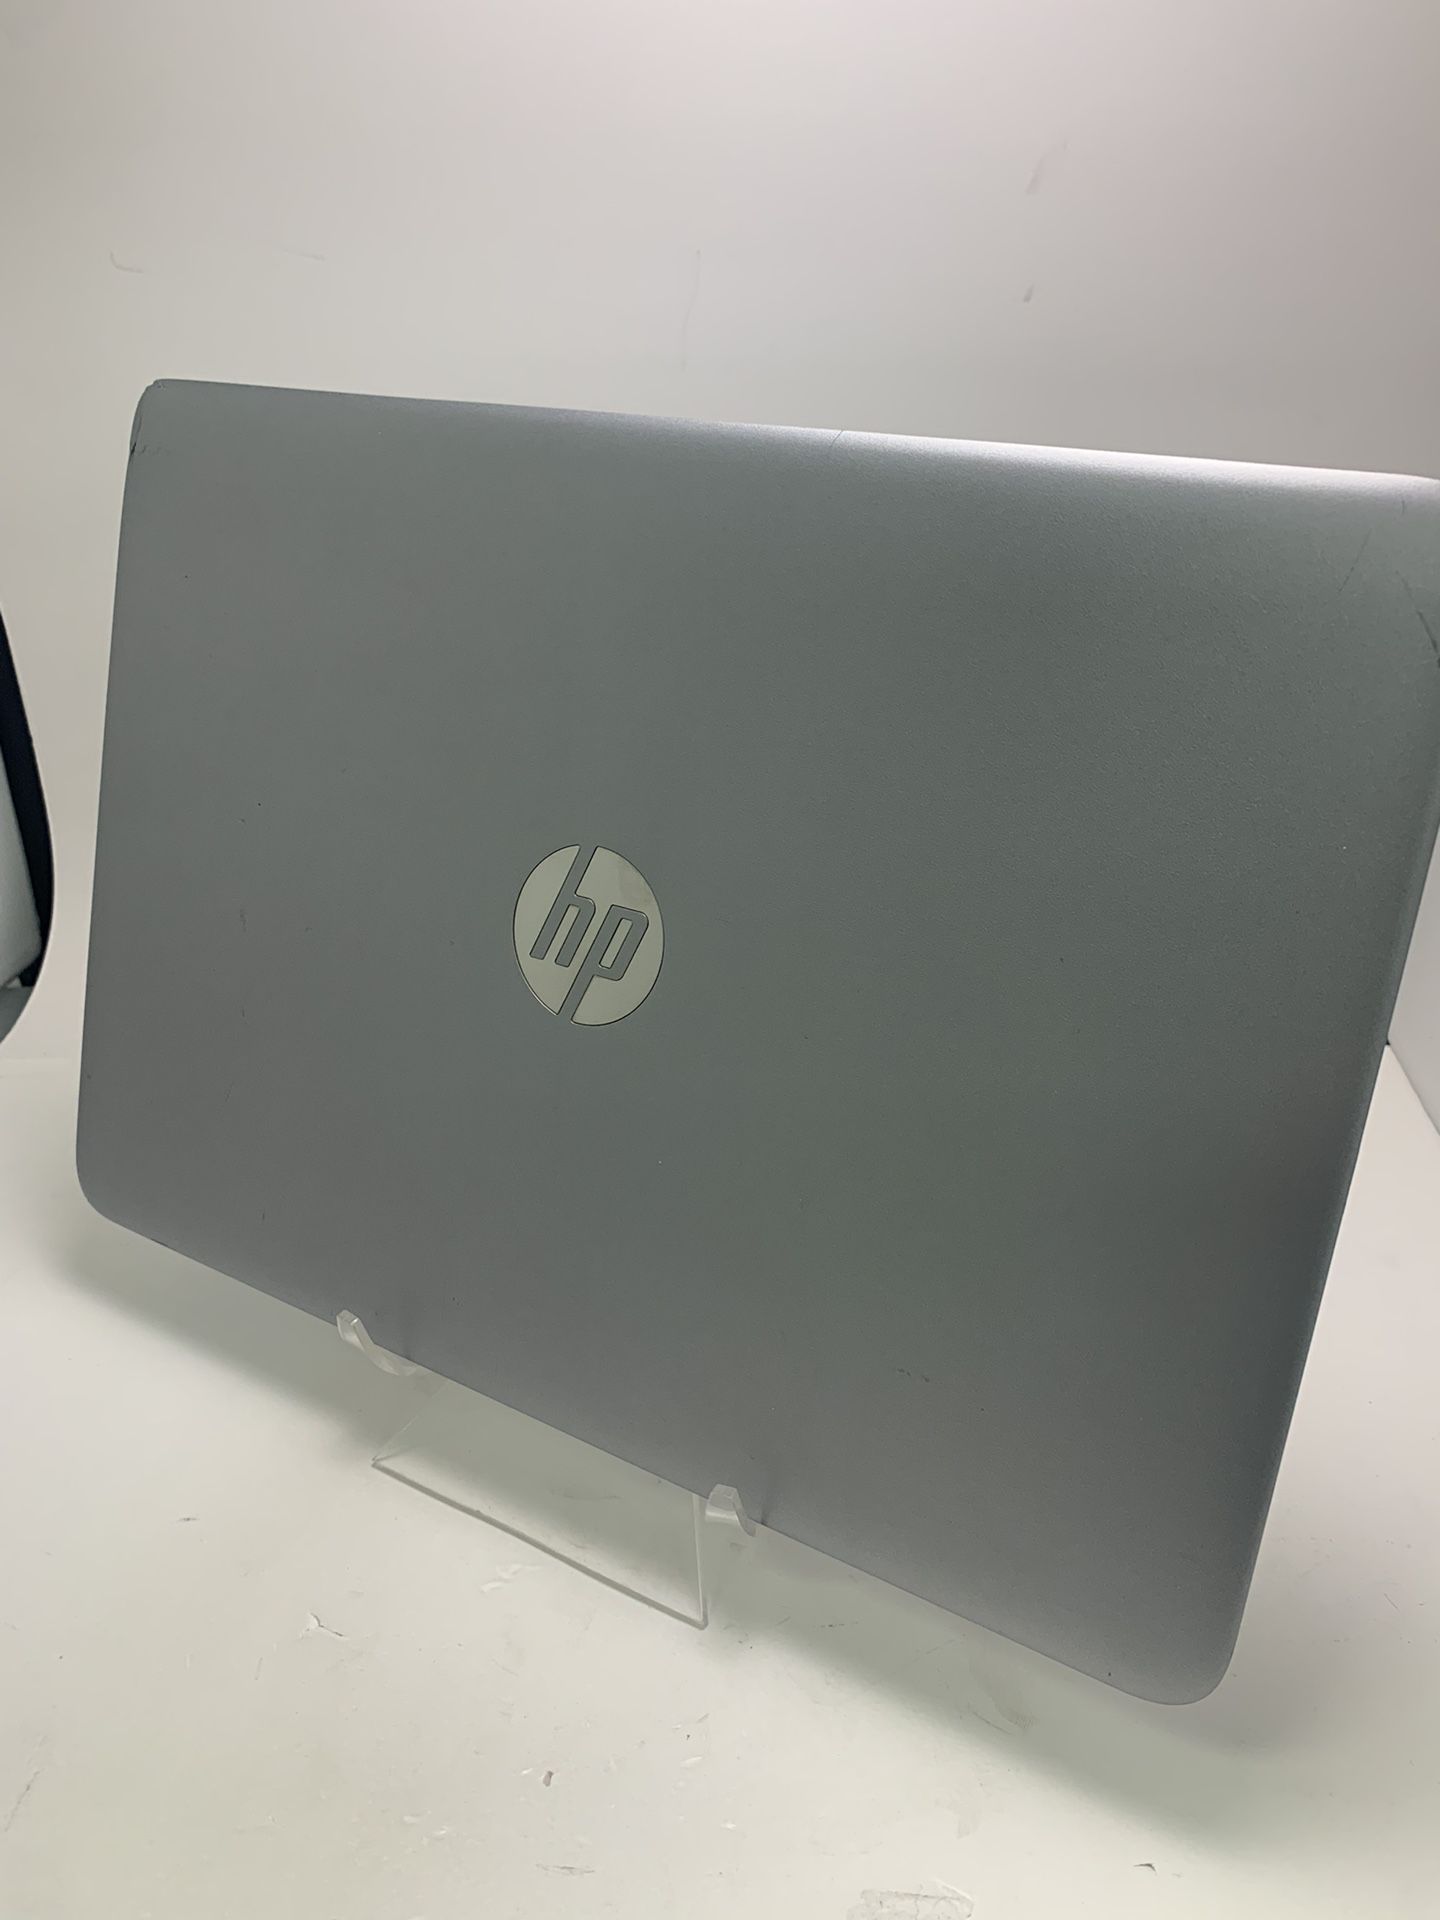 HP EliteBook 840 G3 Laptop With Dent On Corner 12.5”  RAM 16GB, 256GB Memory With 30 Day Warranty 